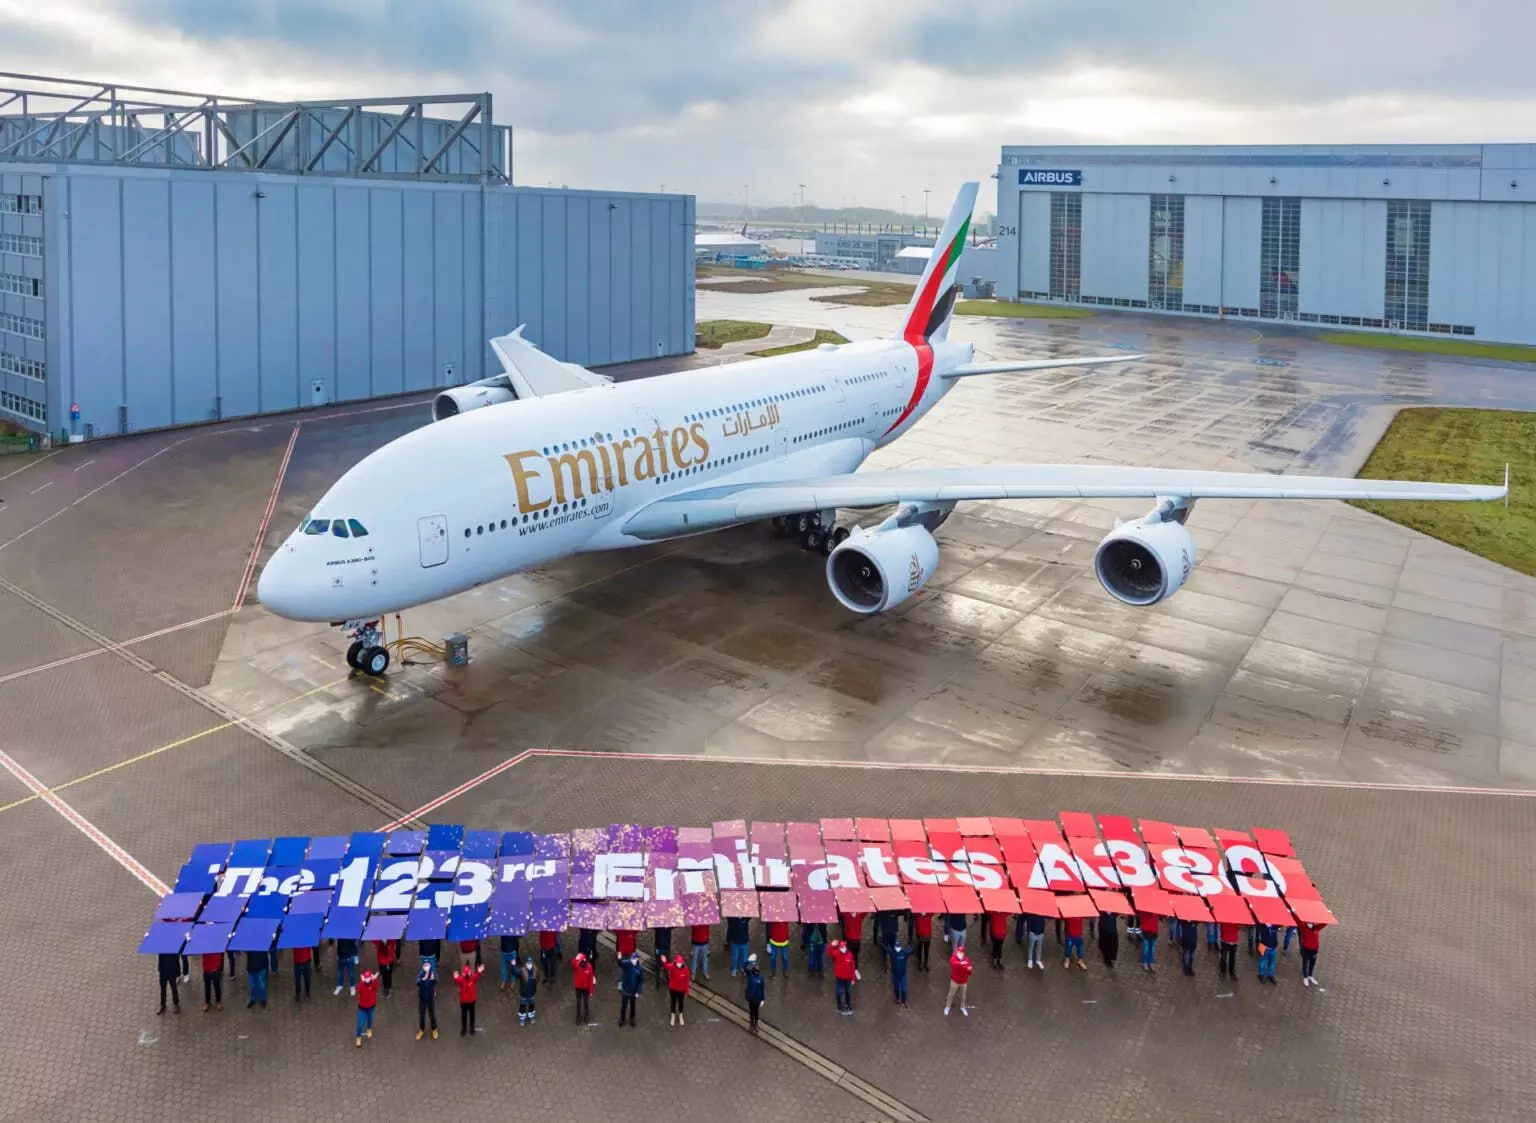 Emirates has taken delivery of the last Airbus A380 bringing the entire double-decker jet program to a close